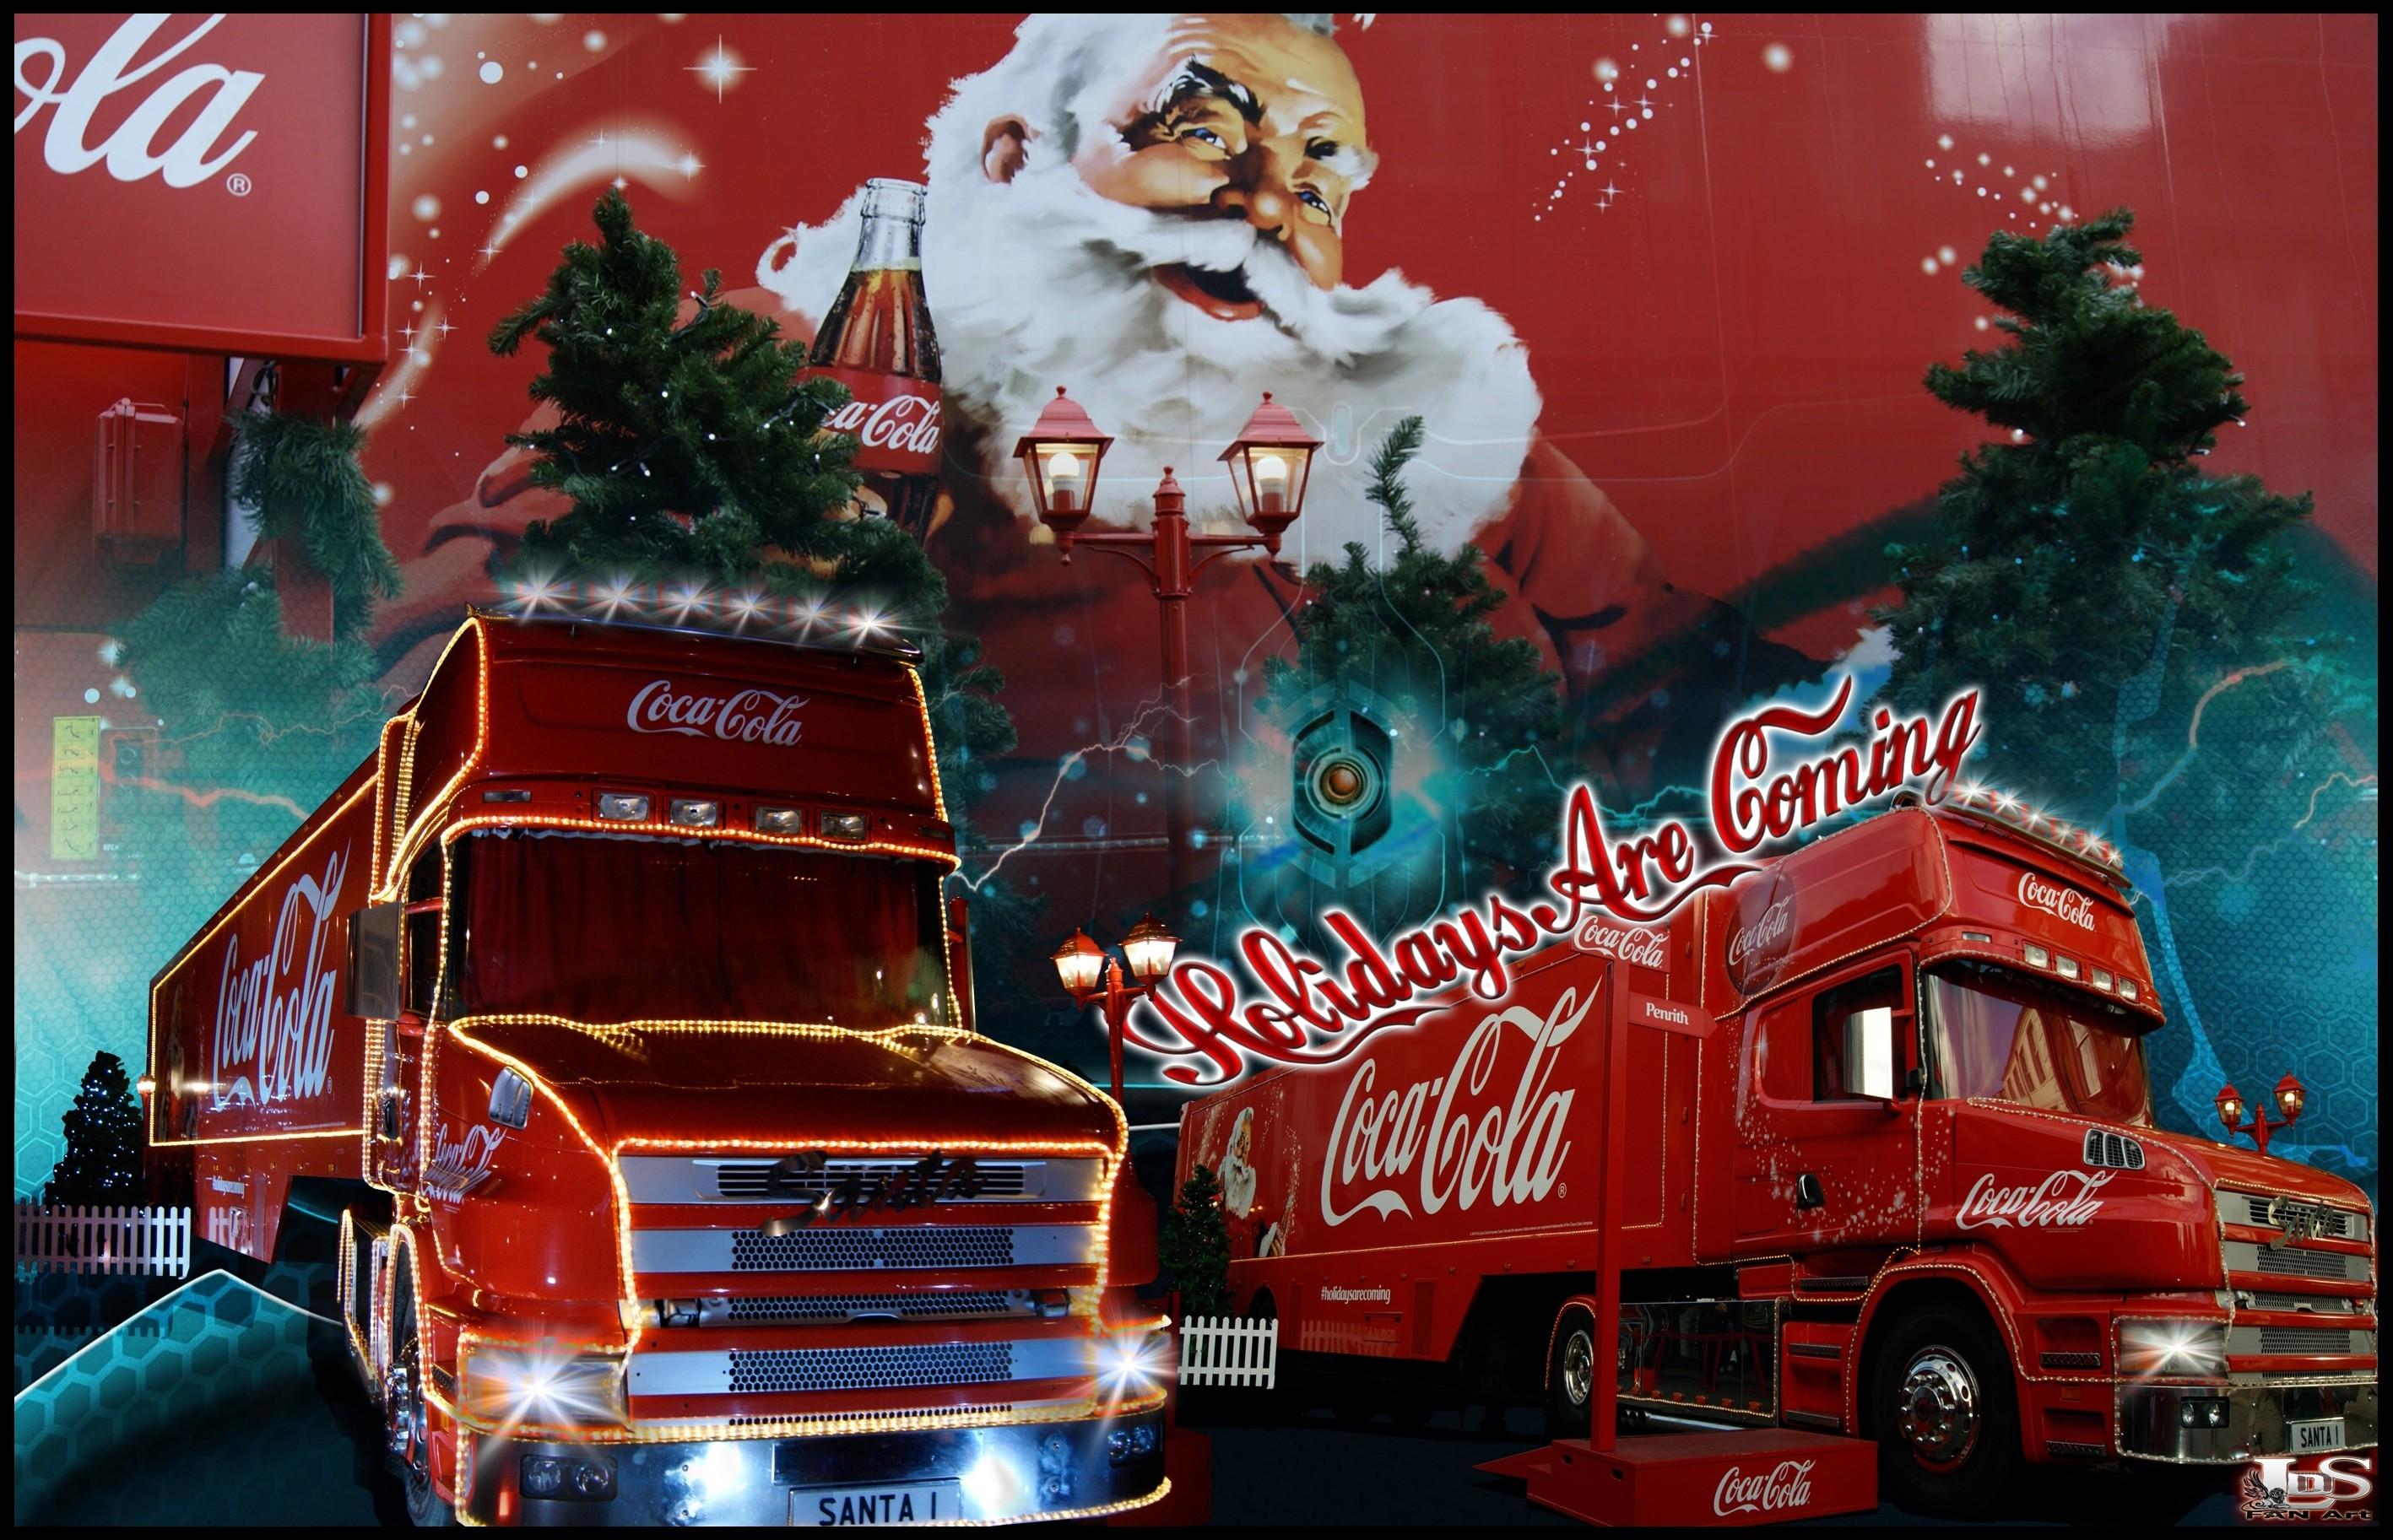 Old Red Truck Christmas Wallpaper